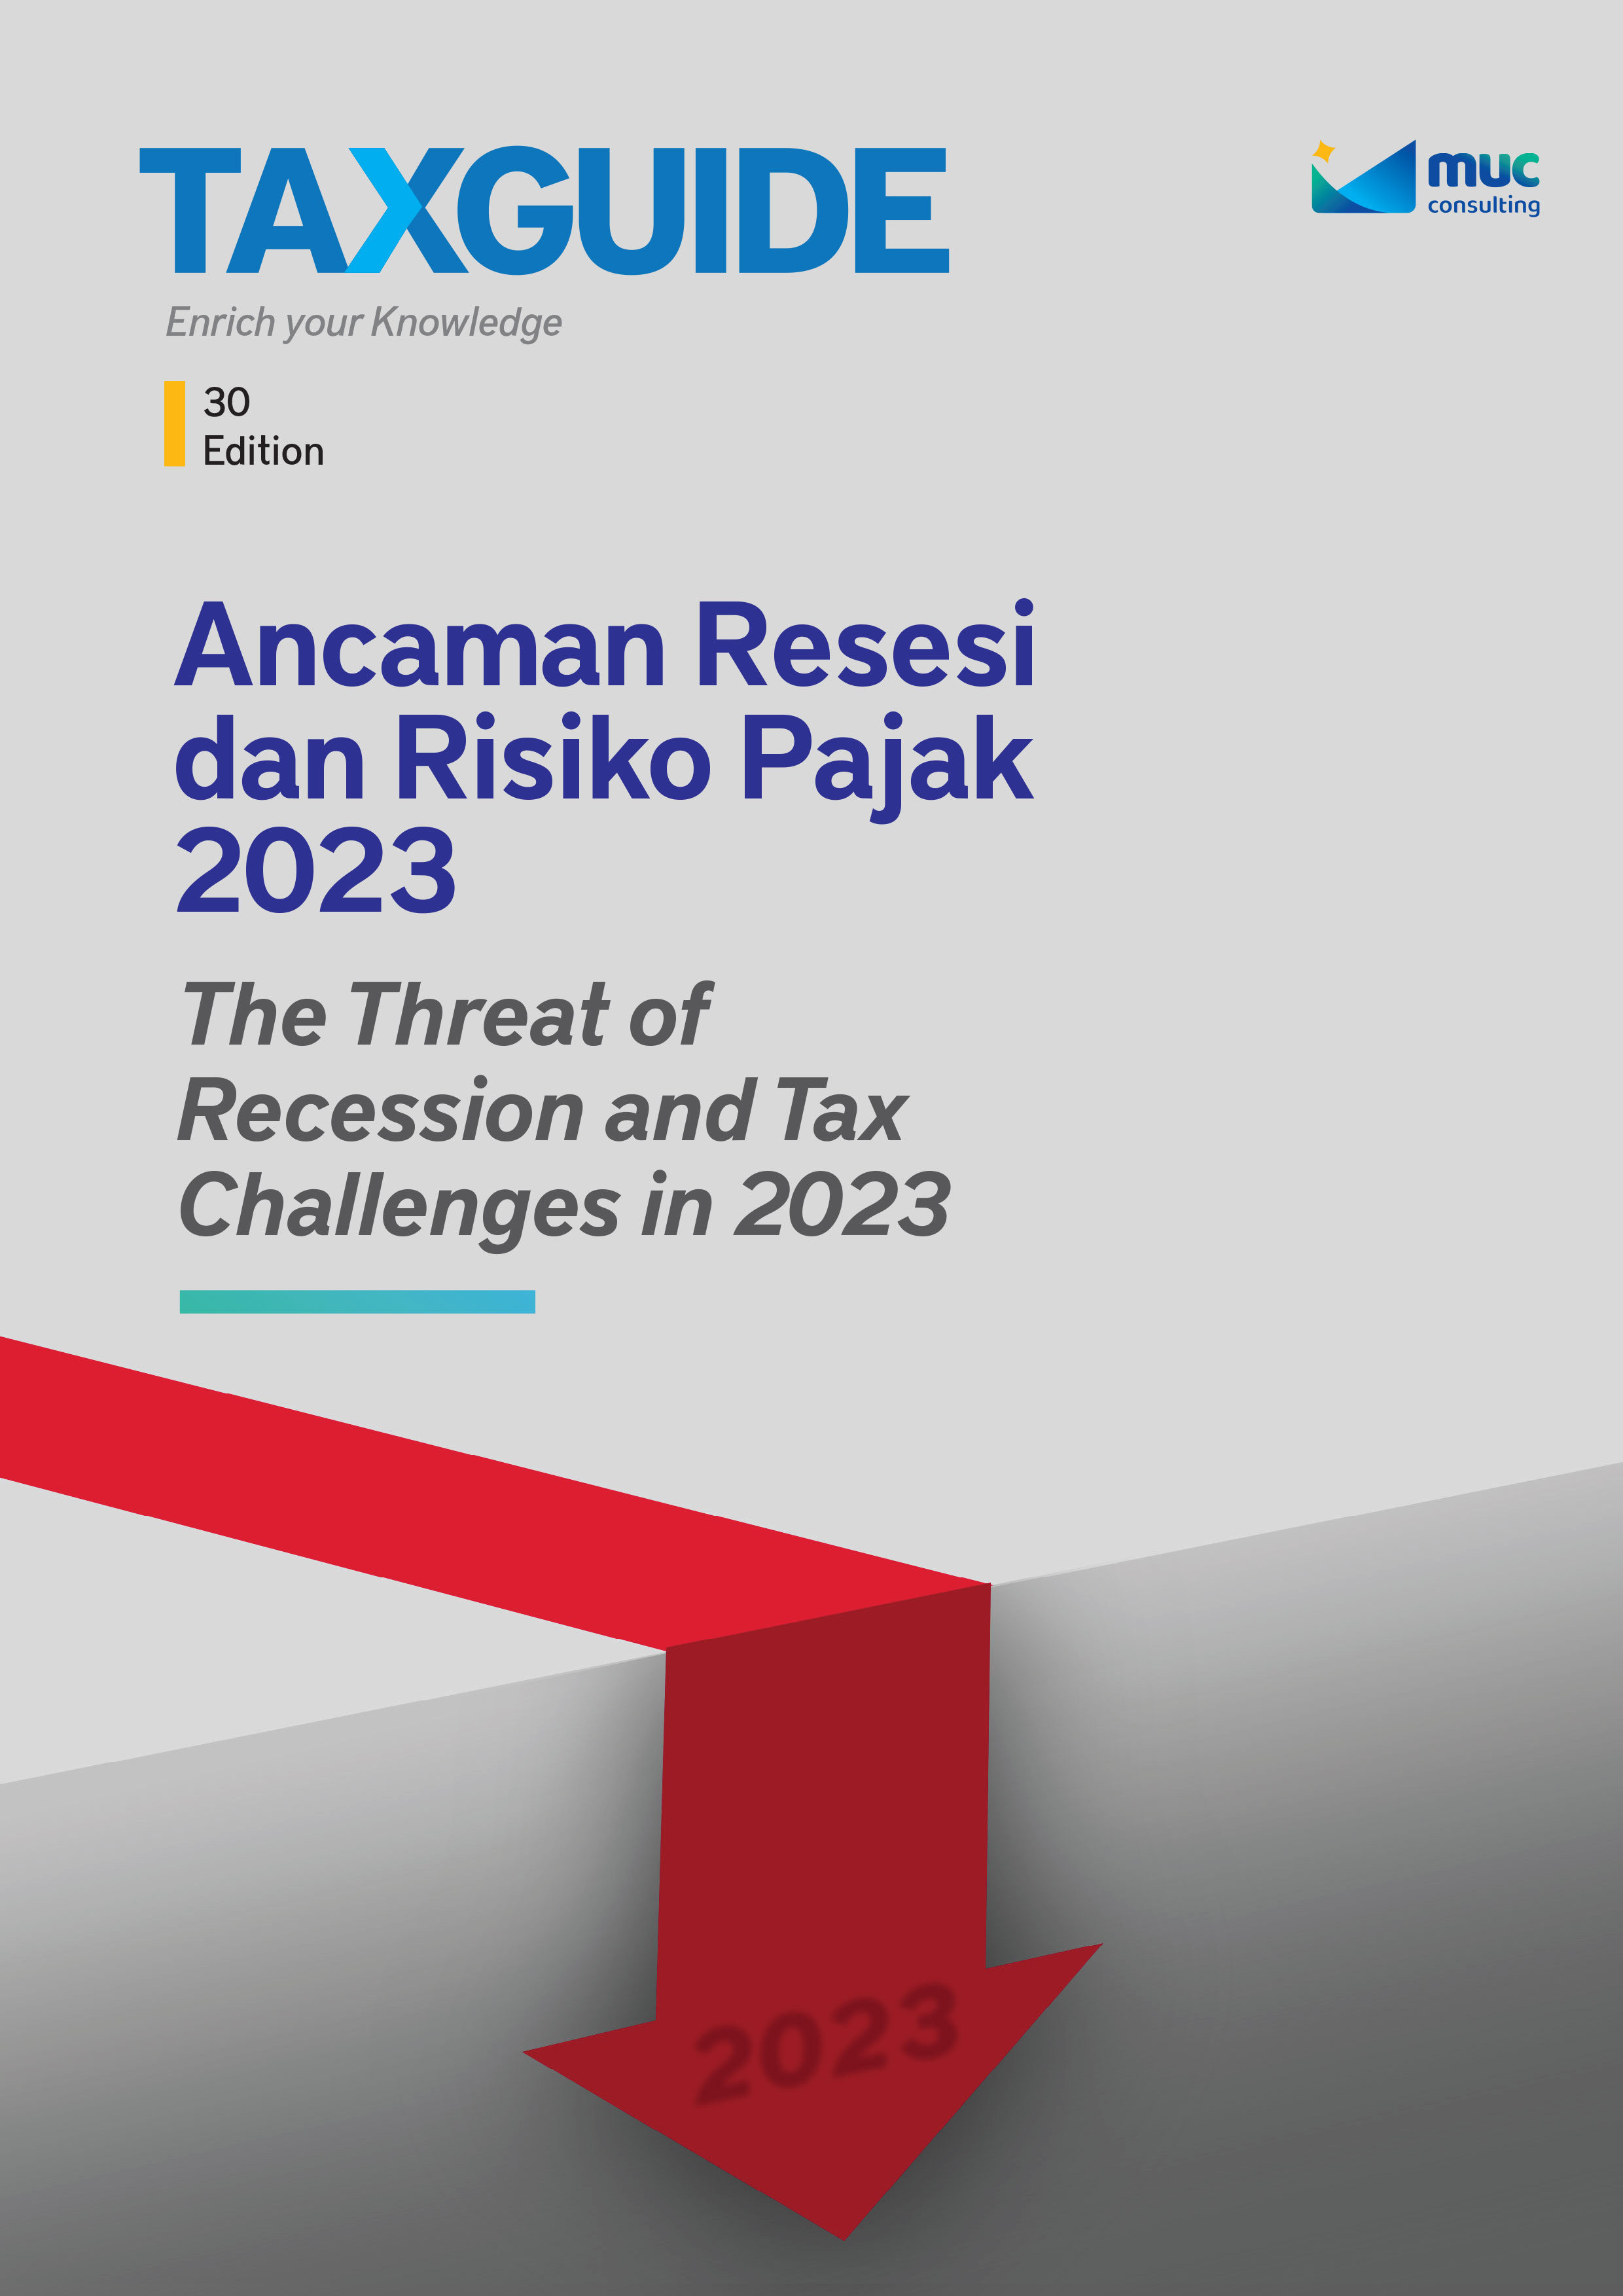 The Threat of Reflation and Tax Challenges in 2023